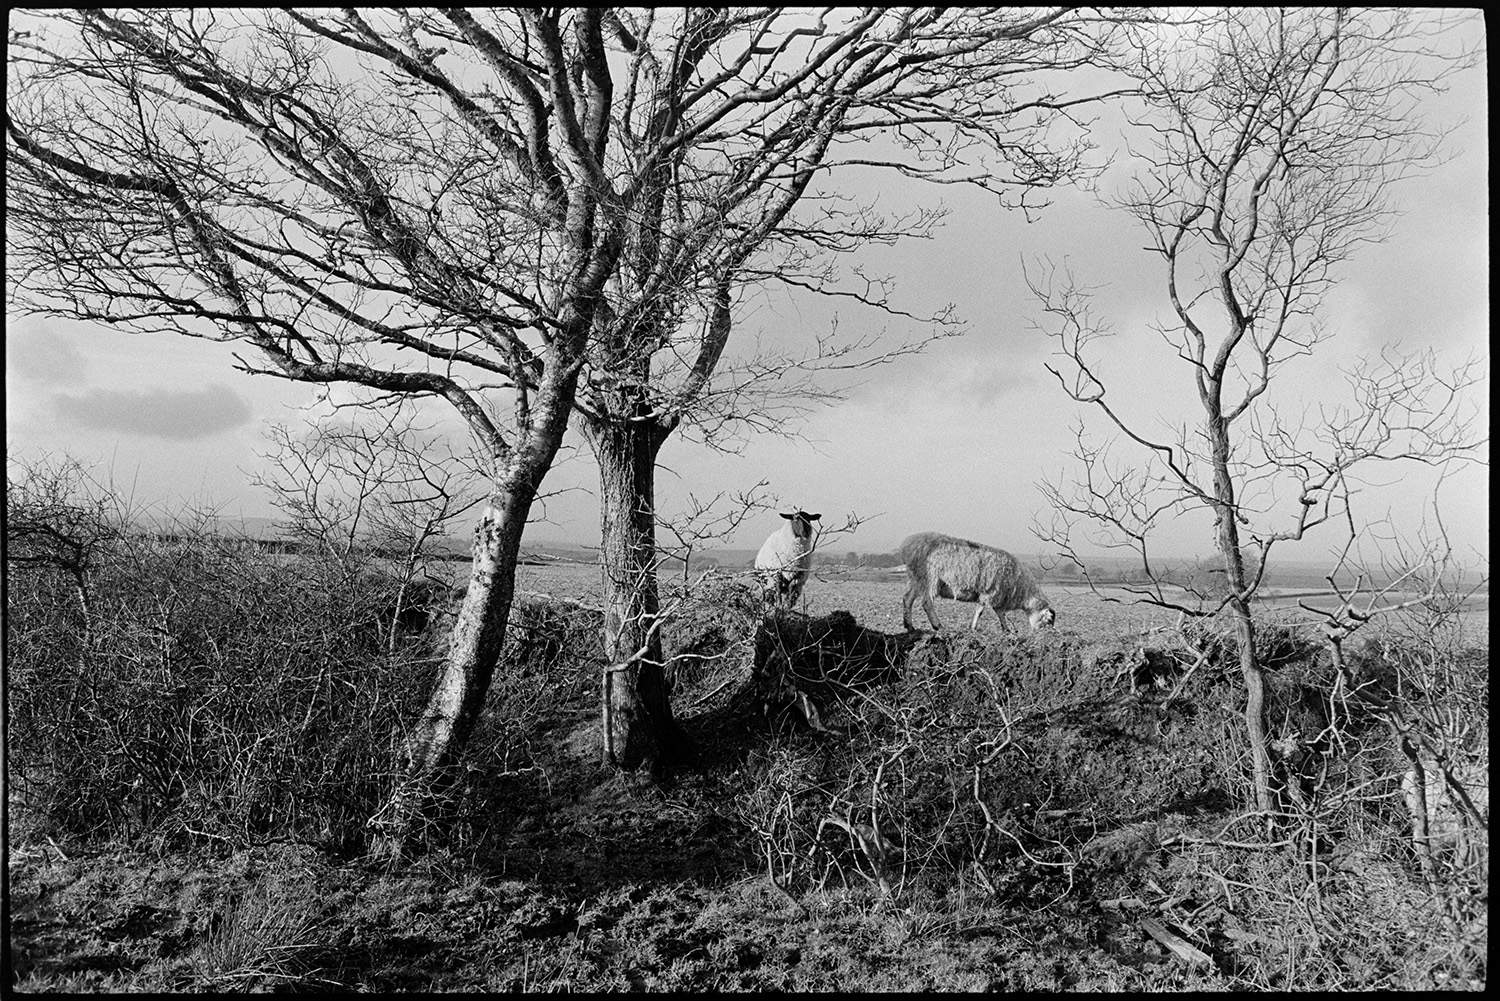 Sheep and cattle on moor, clouds.
[Two sheep standing on a broken down hedgerow with trees in a field at Cuppers Piece, Beaford Moor.]